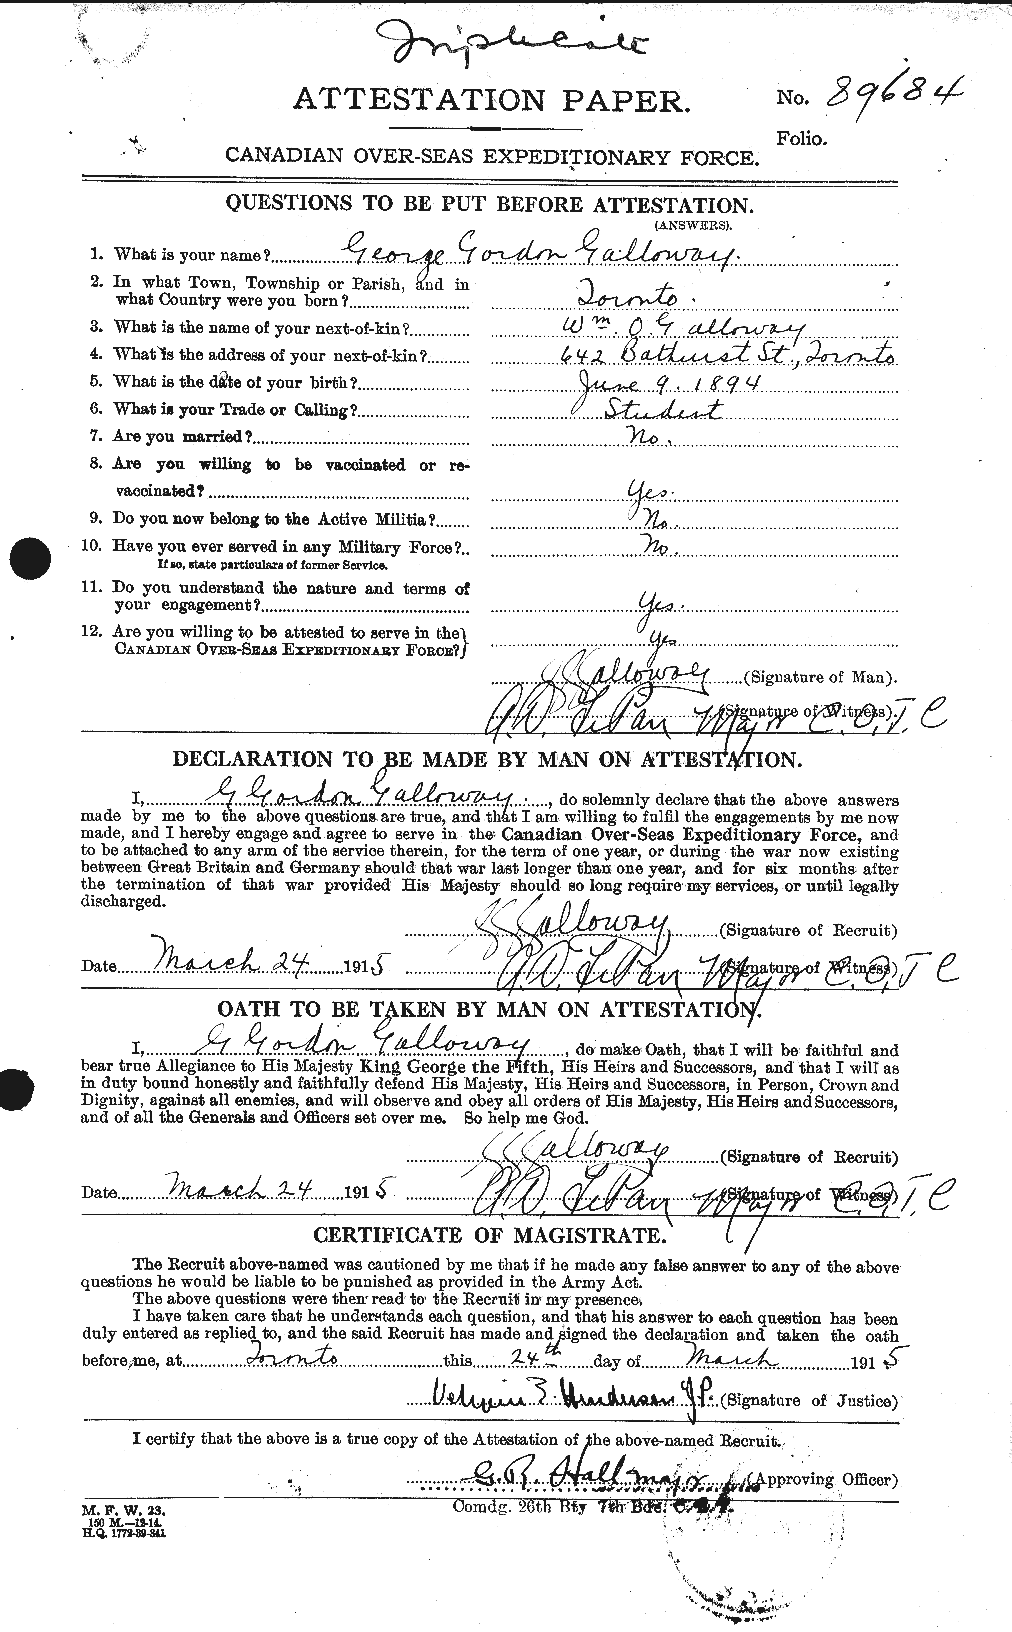 Personnel Records of the First World War - CEF 338773a